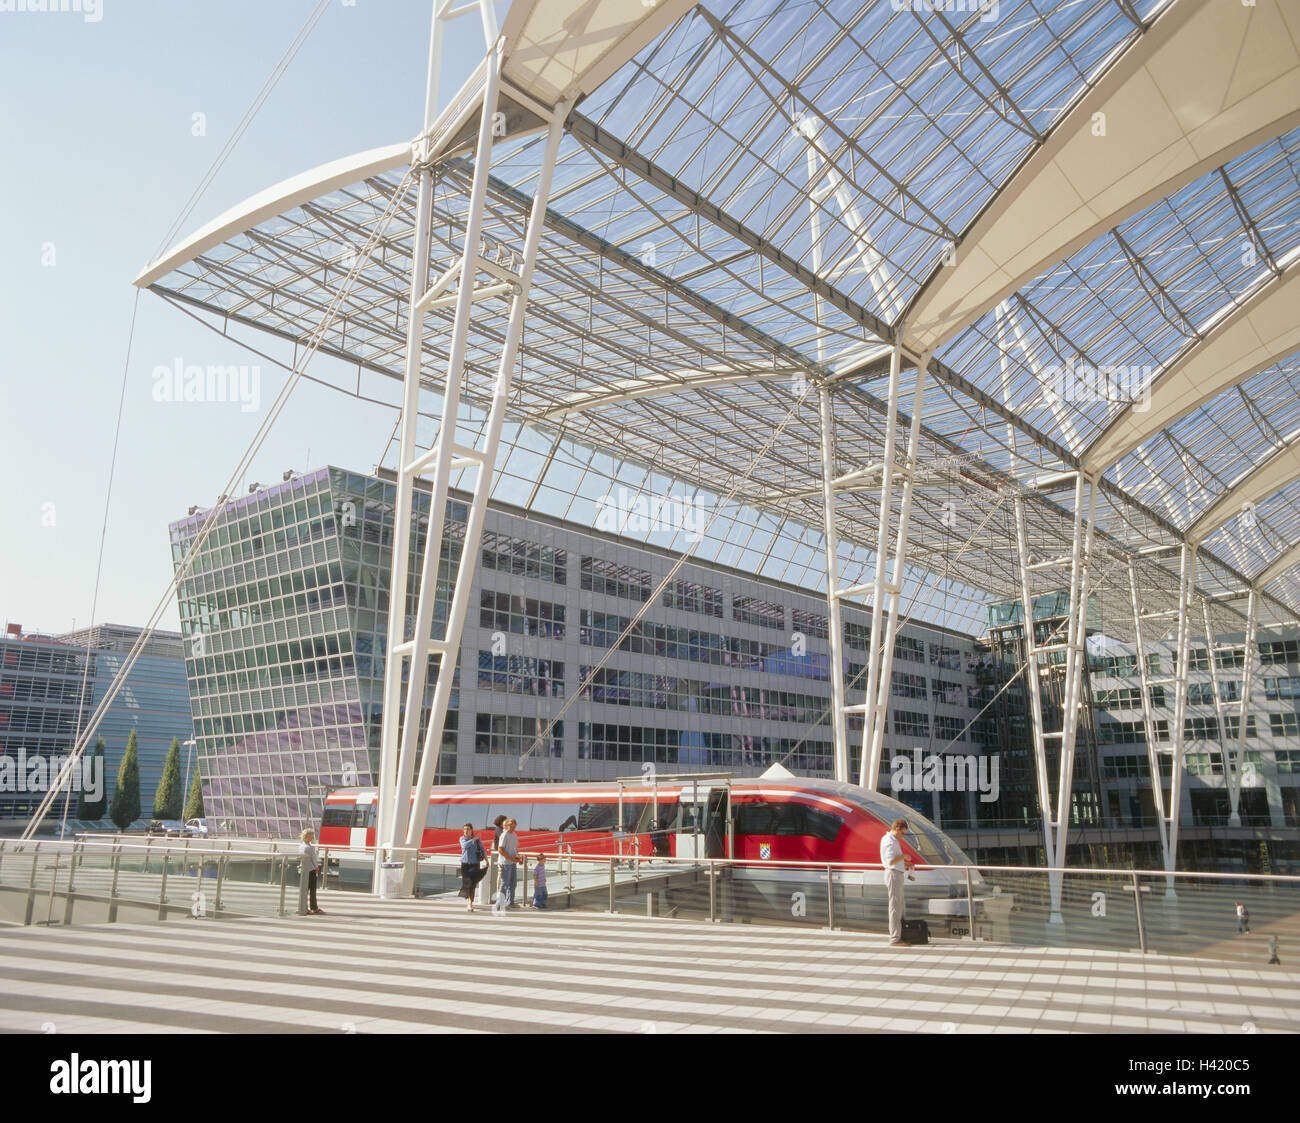 Germany, Bavaria, Munich, airport, terminal 2, Transrapid train, ONLY EDITORIALLY, Europe, Upper Bavaria, roof structure, architecture, airport terminal, transport, promotion, air traffic, building, roof, glass roof, Überdachung, construction, magnet susp Stock Photo